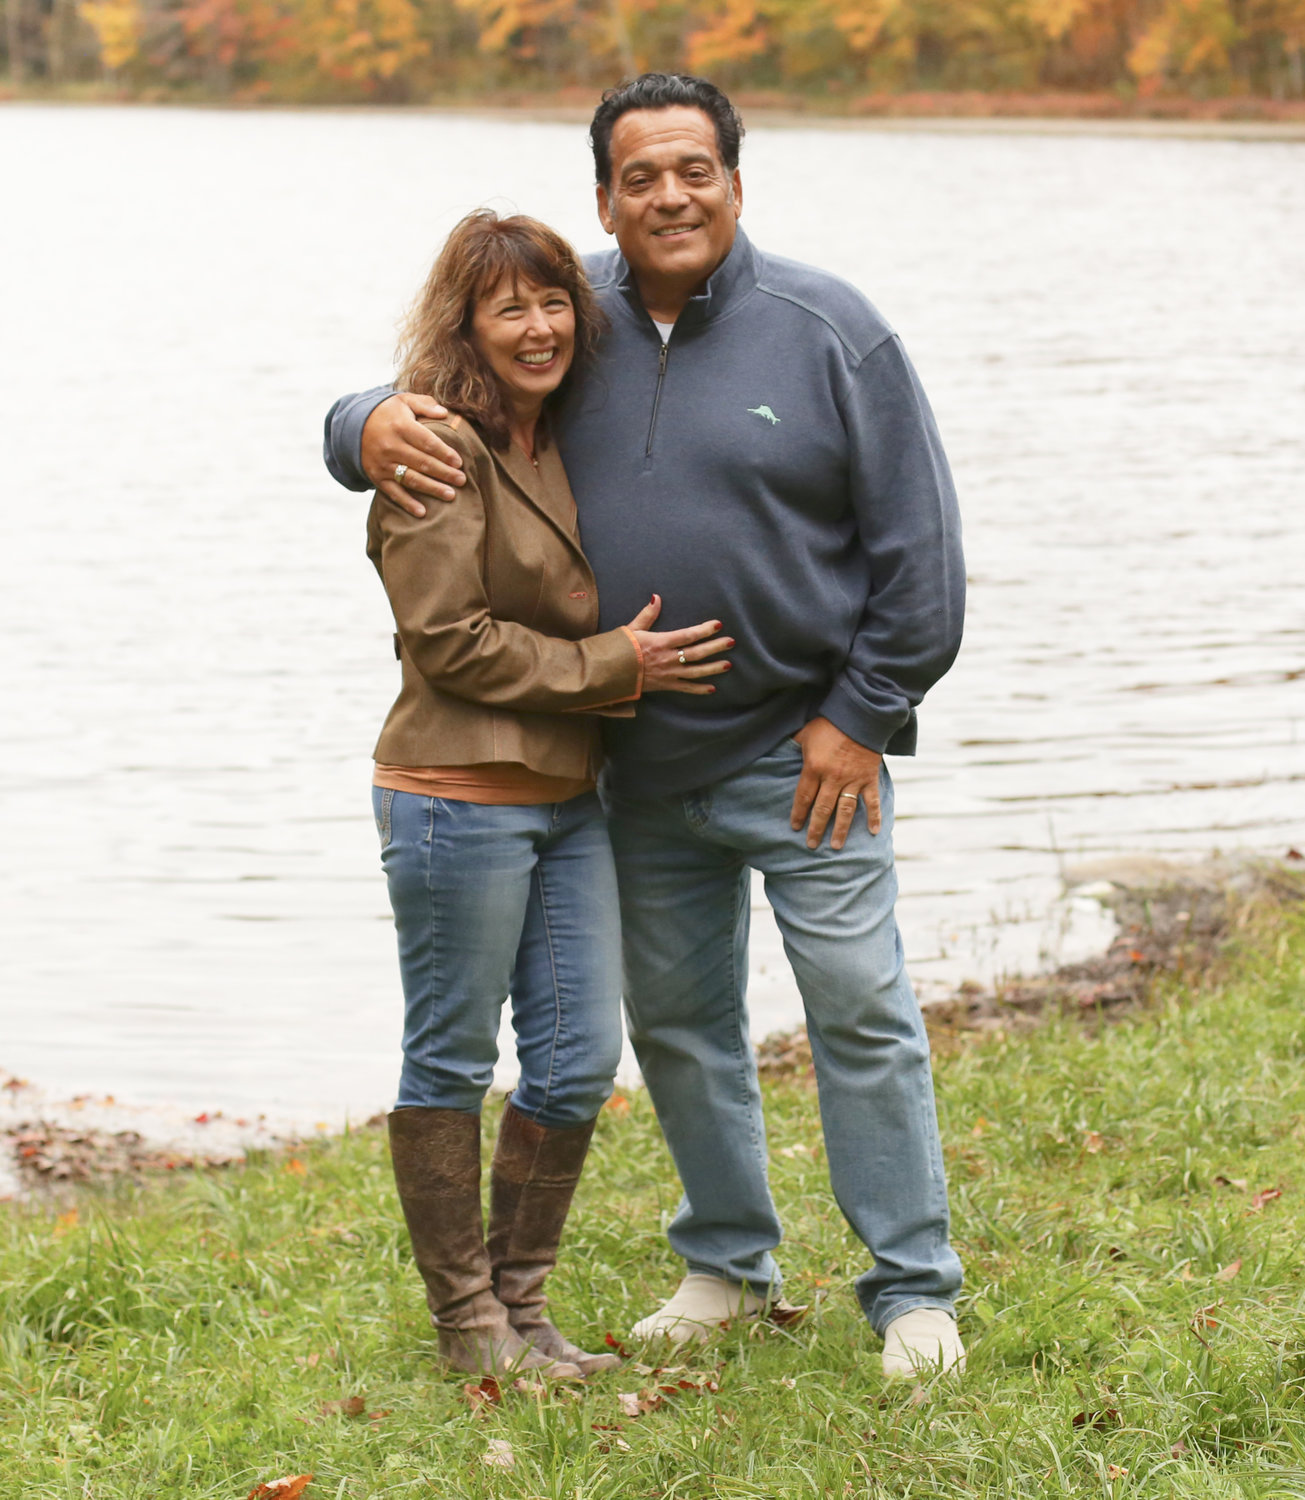 COMING TOGETHER — A benefit will take place for Kevin Hall, a Camden resident who was diagnosed with advanced mesothelioma. Pictured: Kevin and Arlene Hall.